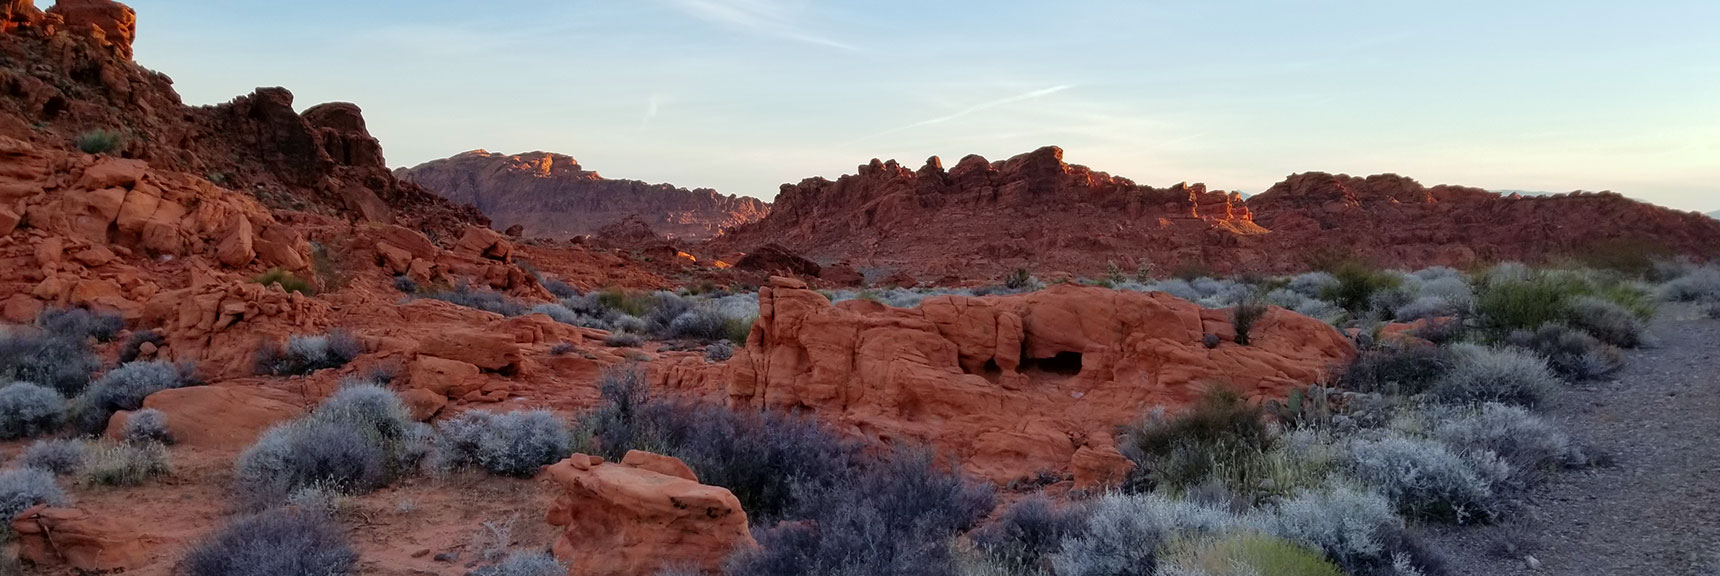 View Behind the Bee Hives Formations on Old Arrowhead Trail in Valley of Fire State Park, Nevada